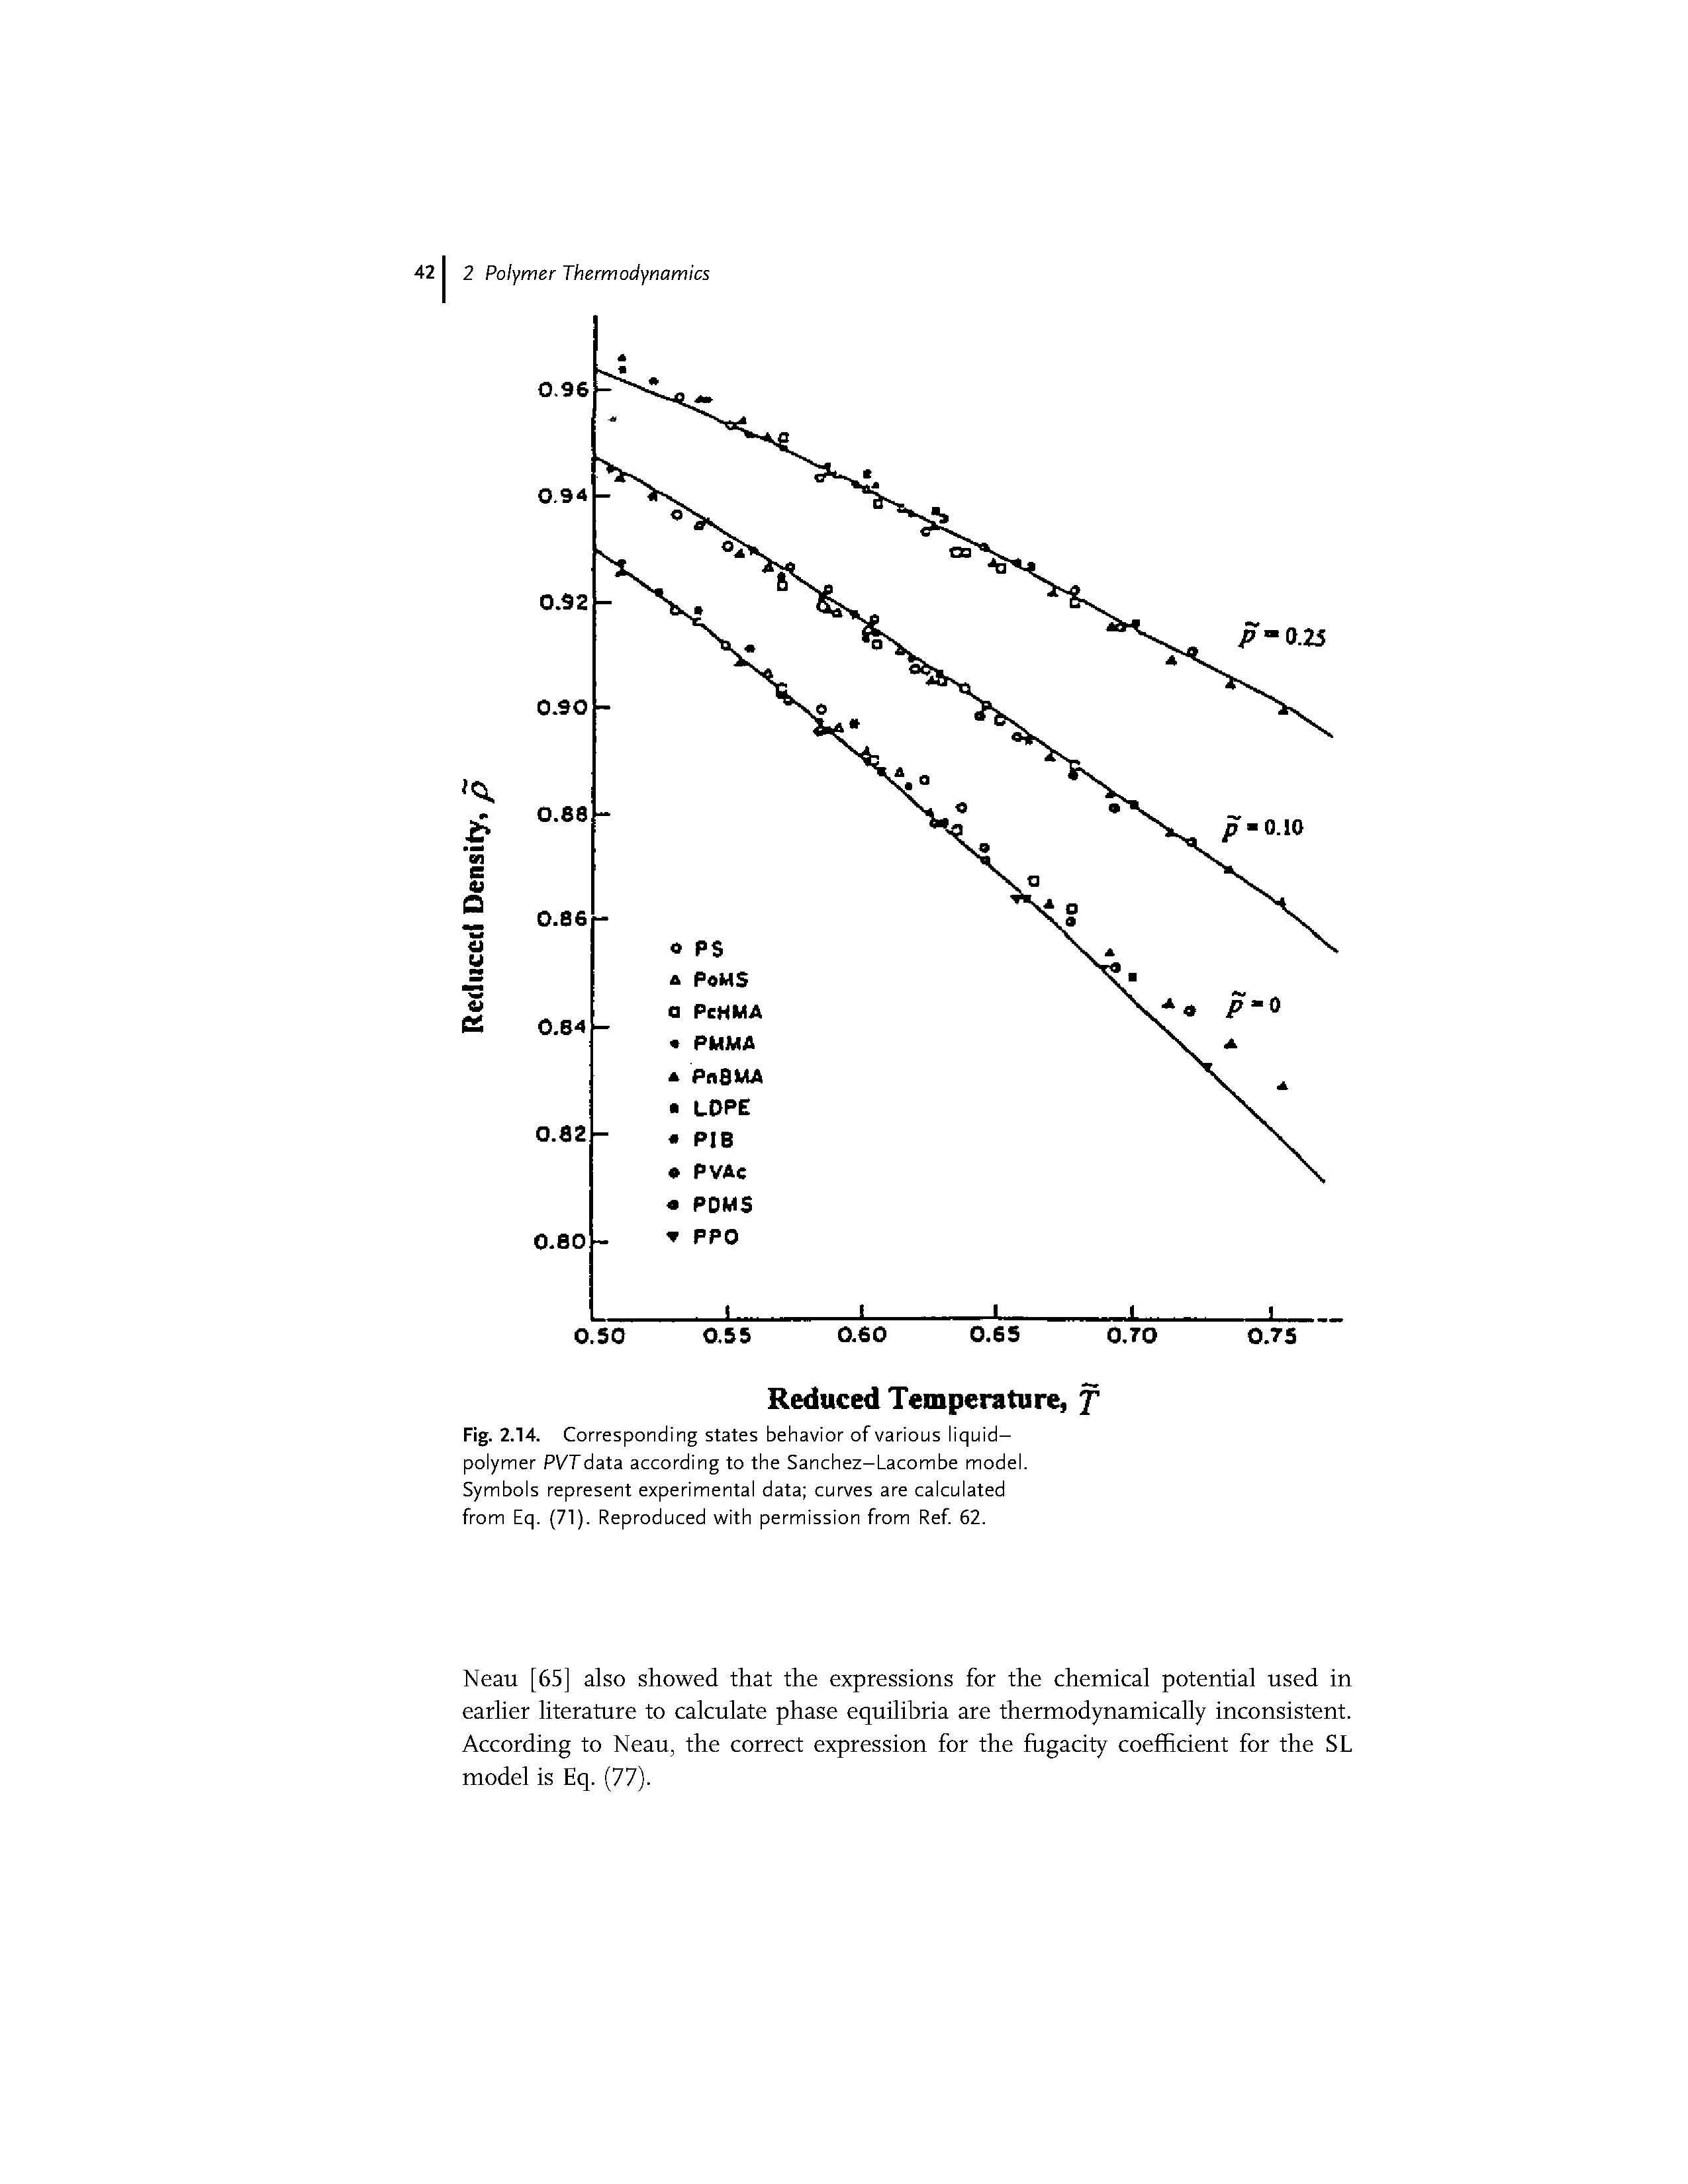 Fig. 2.14. Corresponding states behavior of various liquid-polymer PVT data according to the Sanchez-Lacombe model. Symbols represent experimental data curves are calculated from Eq. (71). Reproduced A/ith permission from Ref 62.